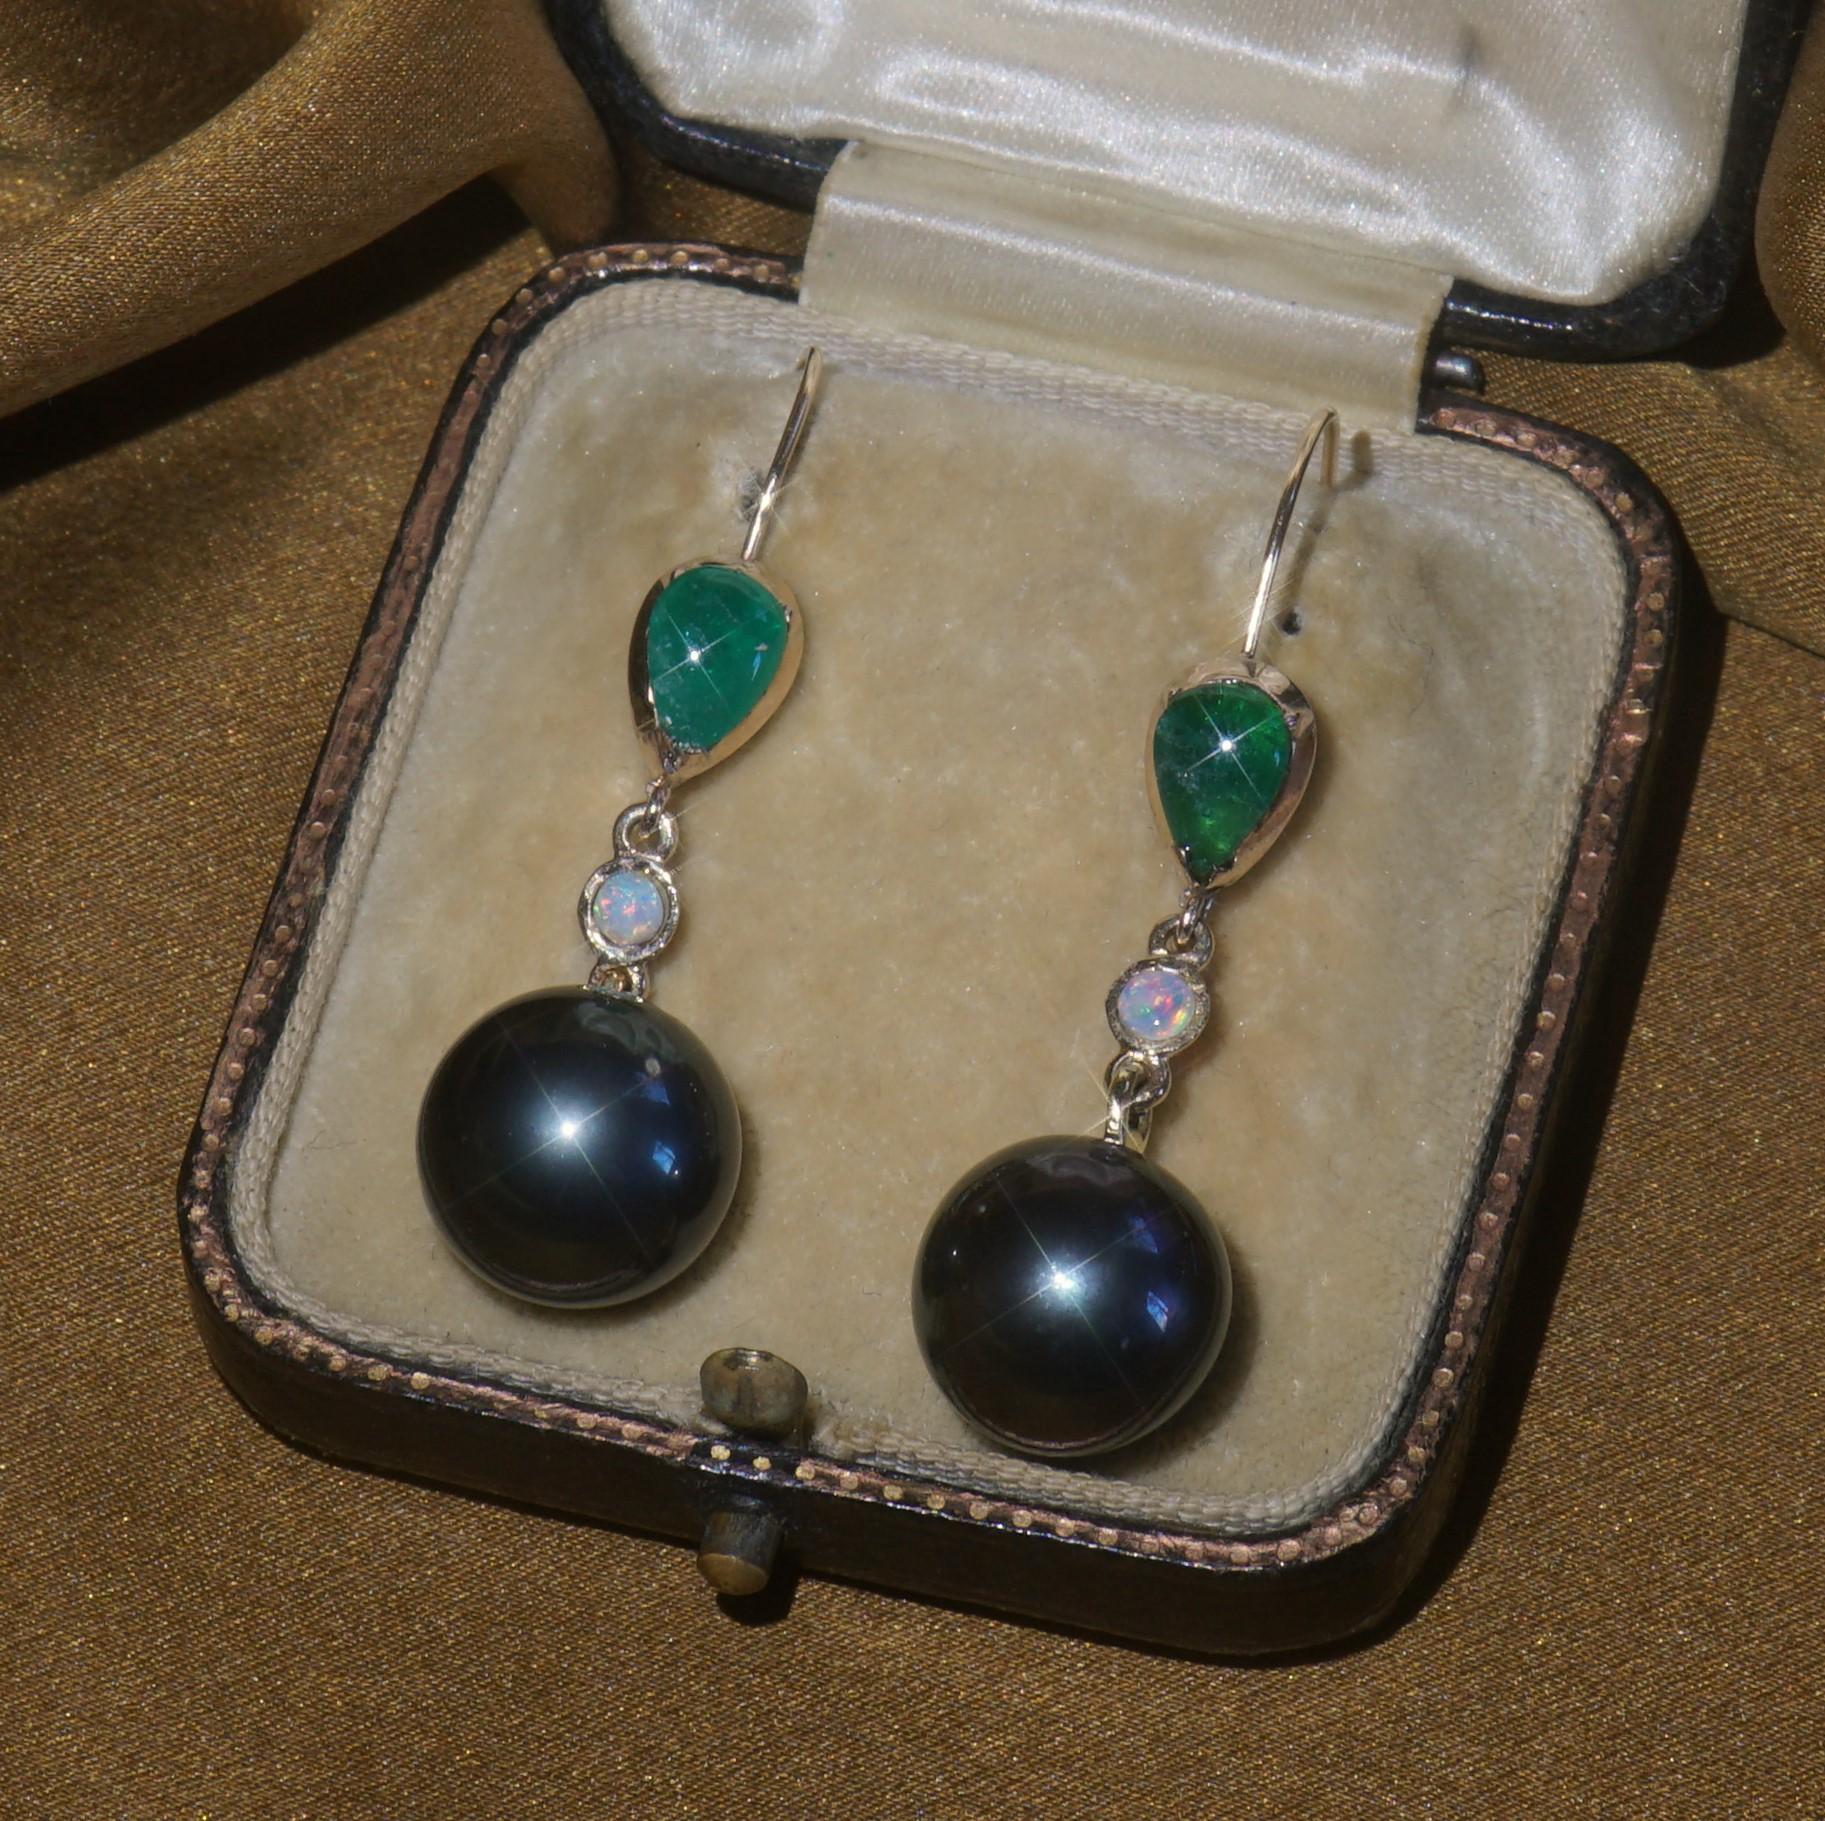 Old South Jewels proudly presents.... LUXURY.   GIA Certified ANTIQUE 14K GOLD TAHITIAN PEARL, EMERALD, OPAL EARRINGS AND BOX!   Huge Vintage 12MM Natural Saltwater Pearls, Emeralds, and Australian Opals--Stunning!   Huge Tahitian Glowing Baroque